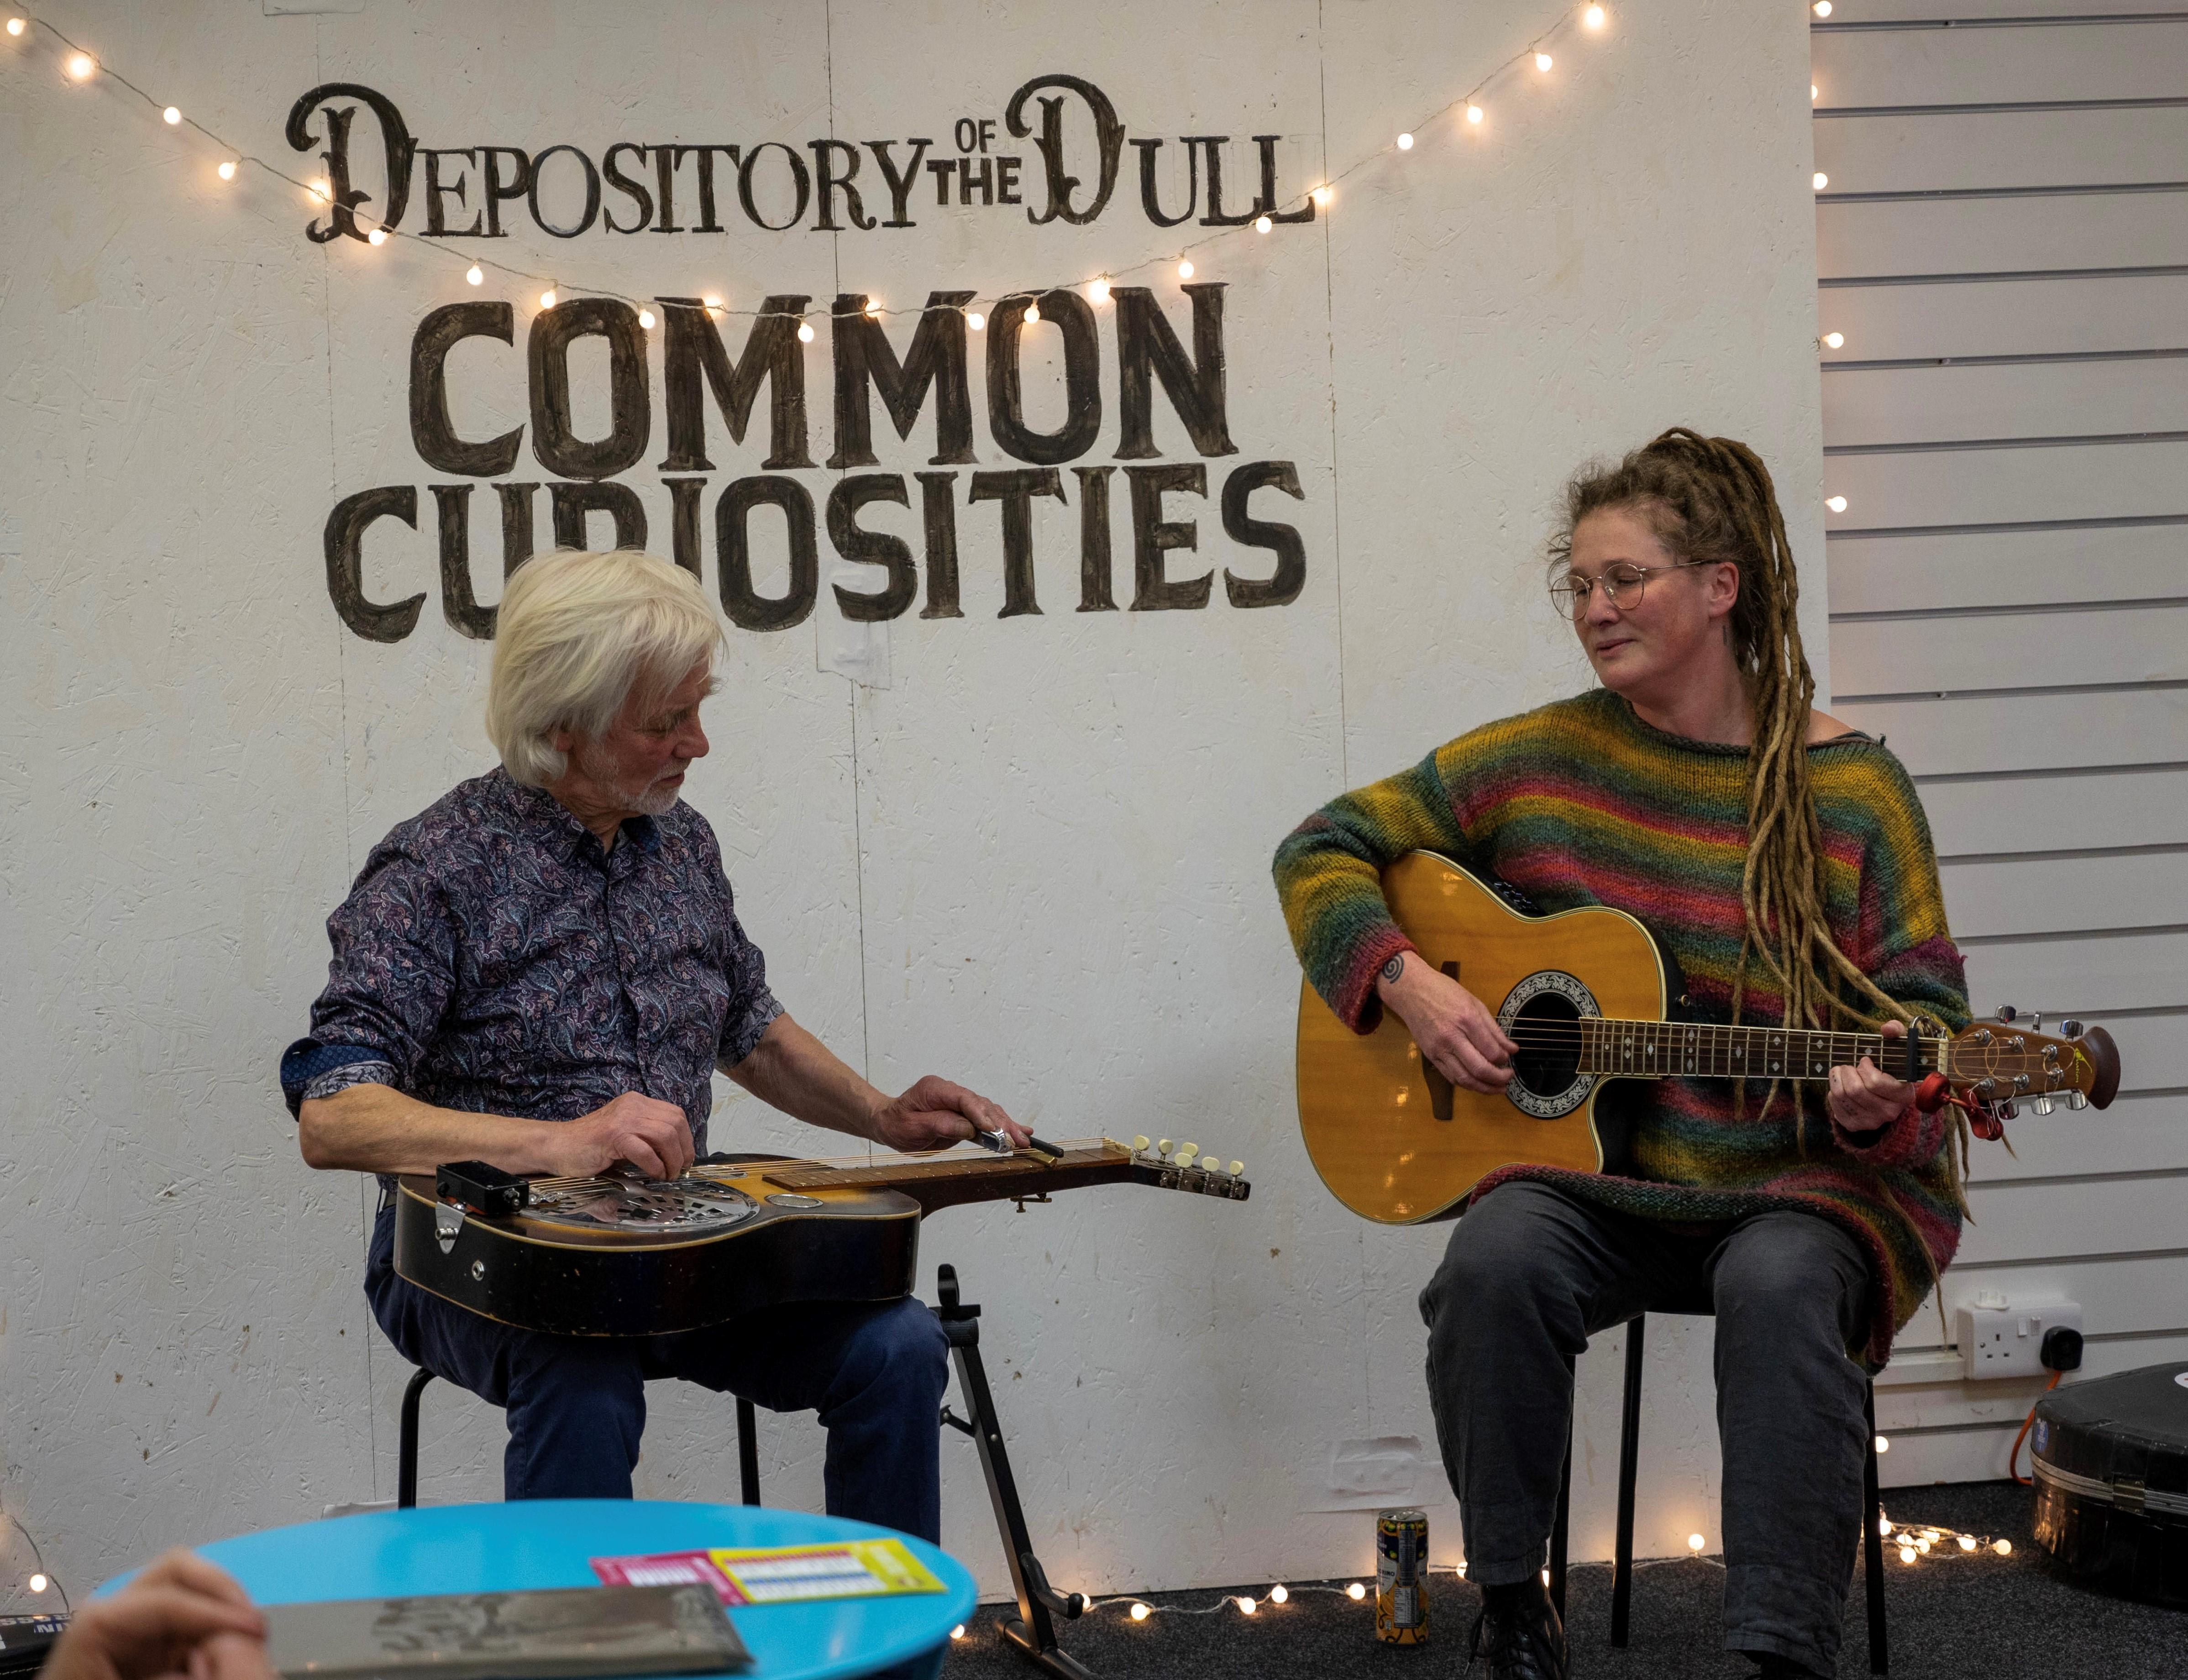 The redeveloped Brampton Museum is hosting a heritage-inspired folk performance by talented duo Brennan & Buchanan on Saturday, 18 June.